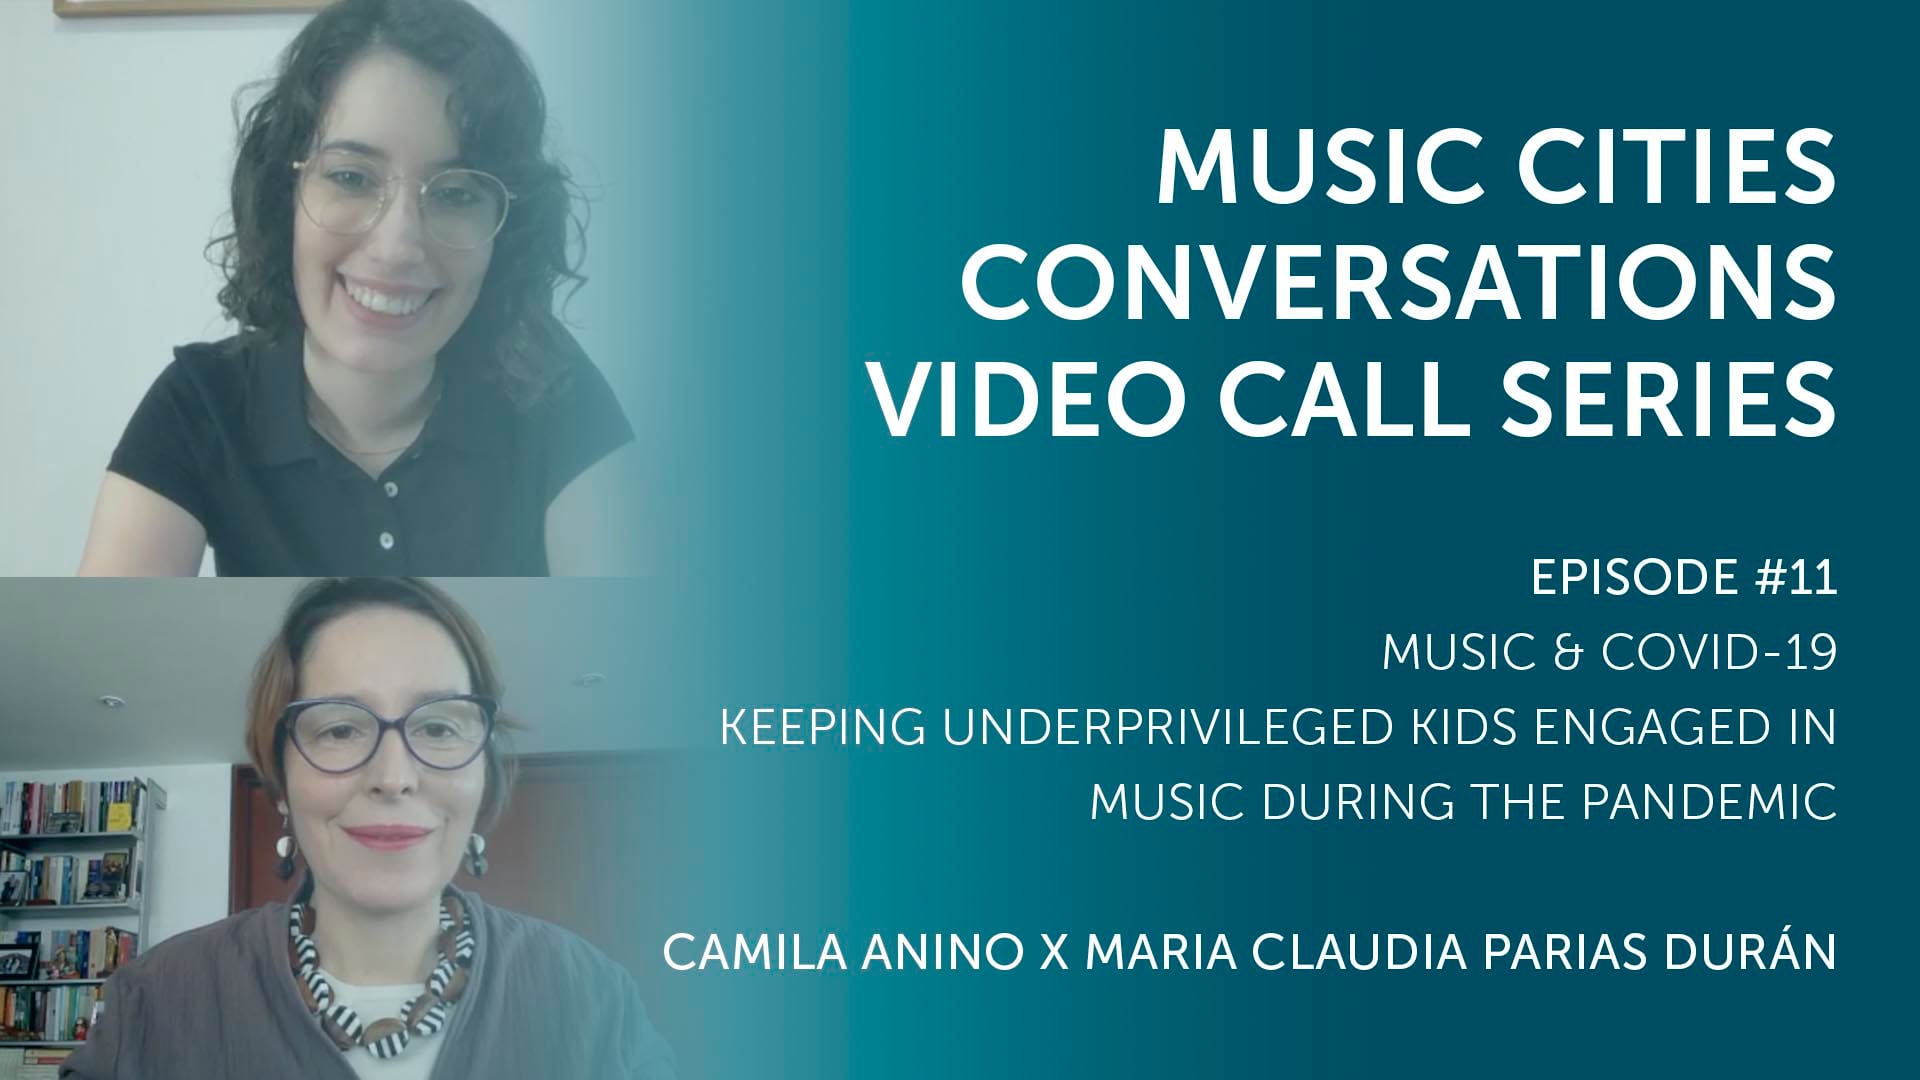 Episode 11: Keeping Underprivileged Kids Engaged in Music during the Pandemic - María Claudia Parias